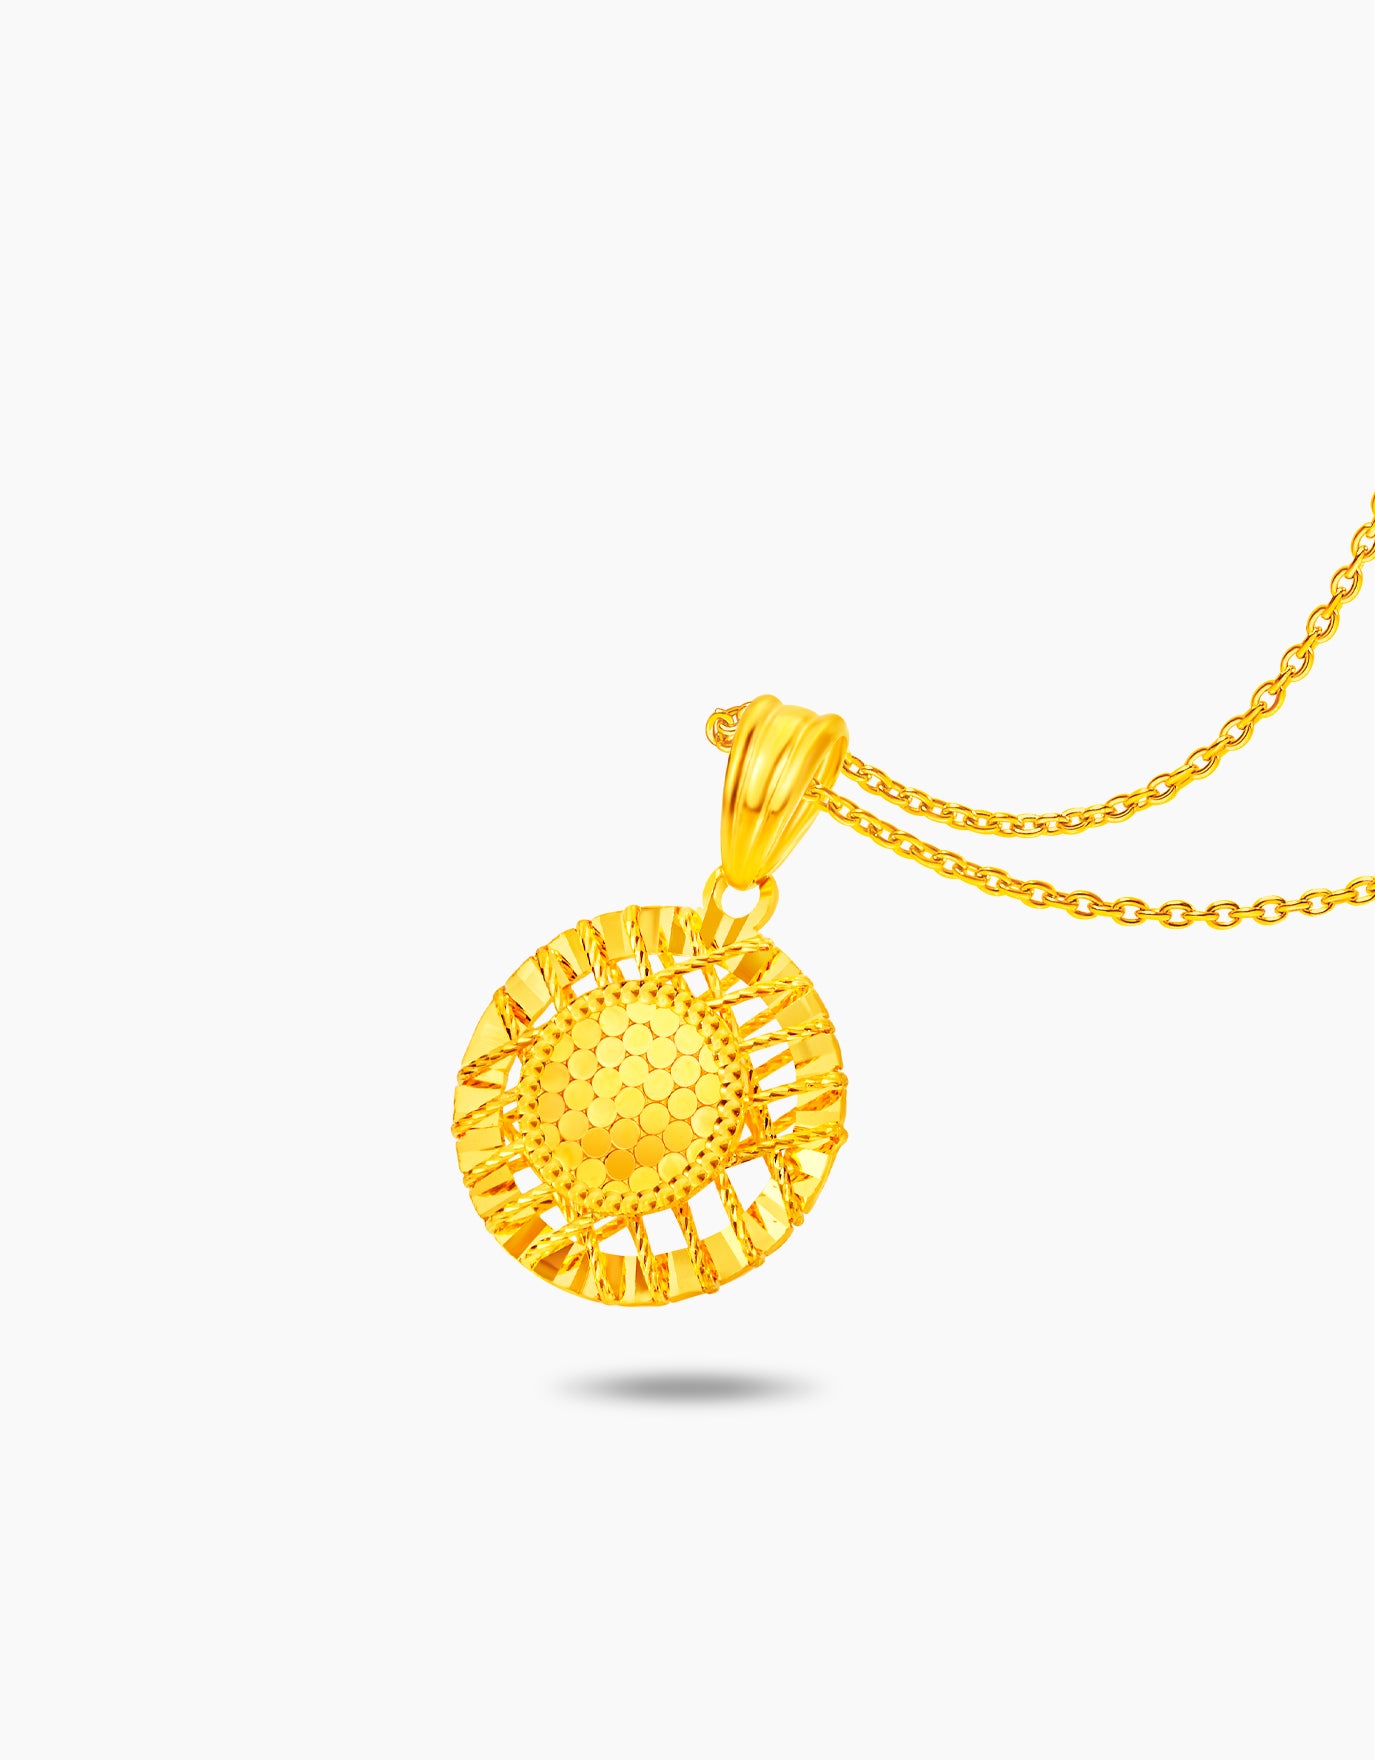 LVC 9IN Eloquence 999 Gold Pendant